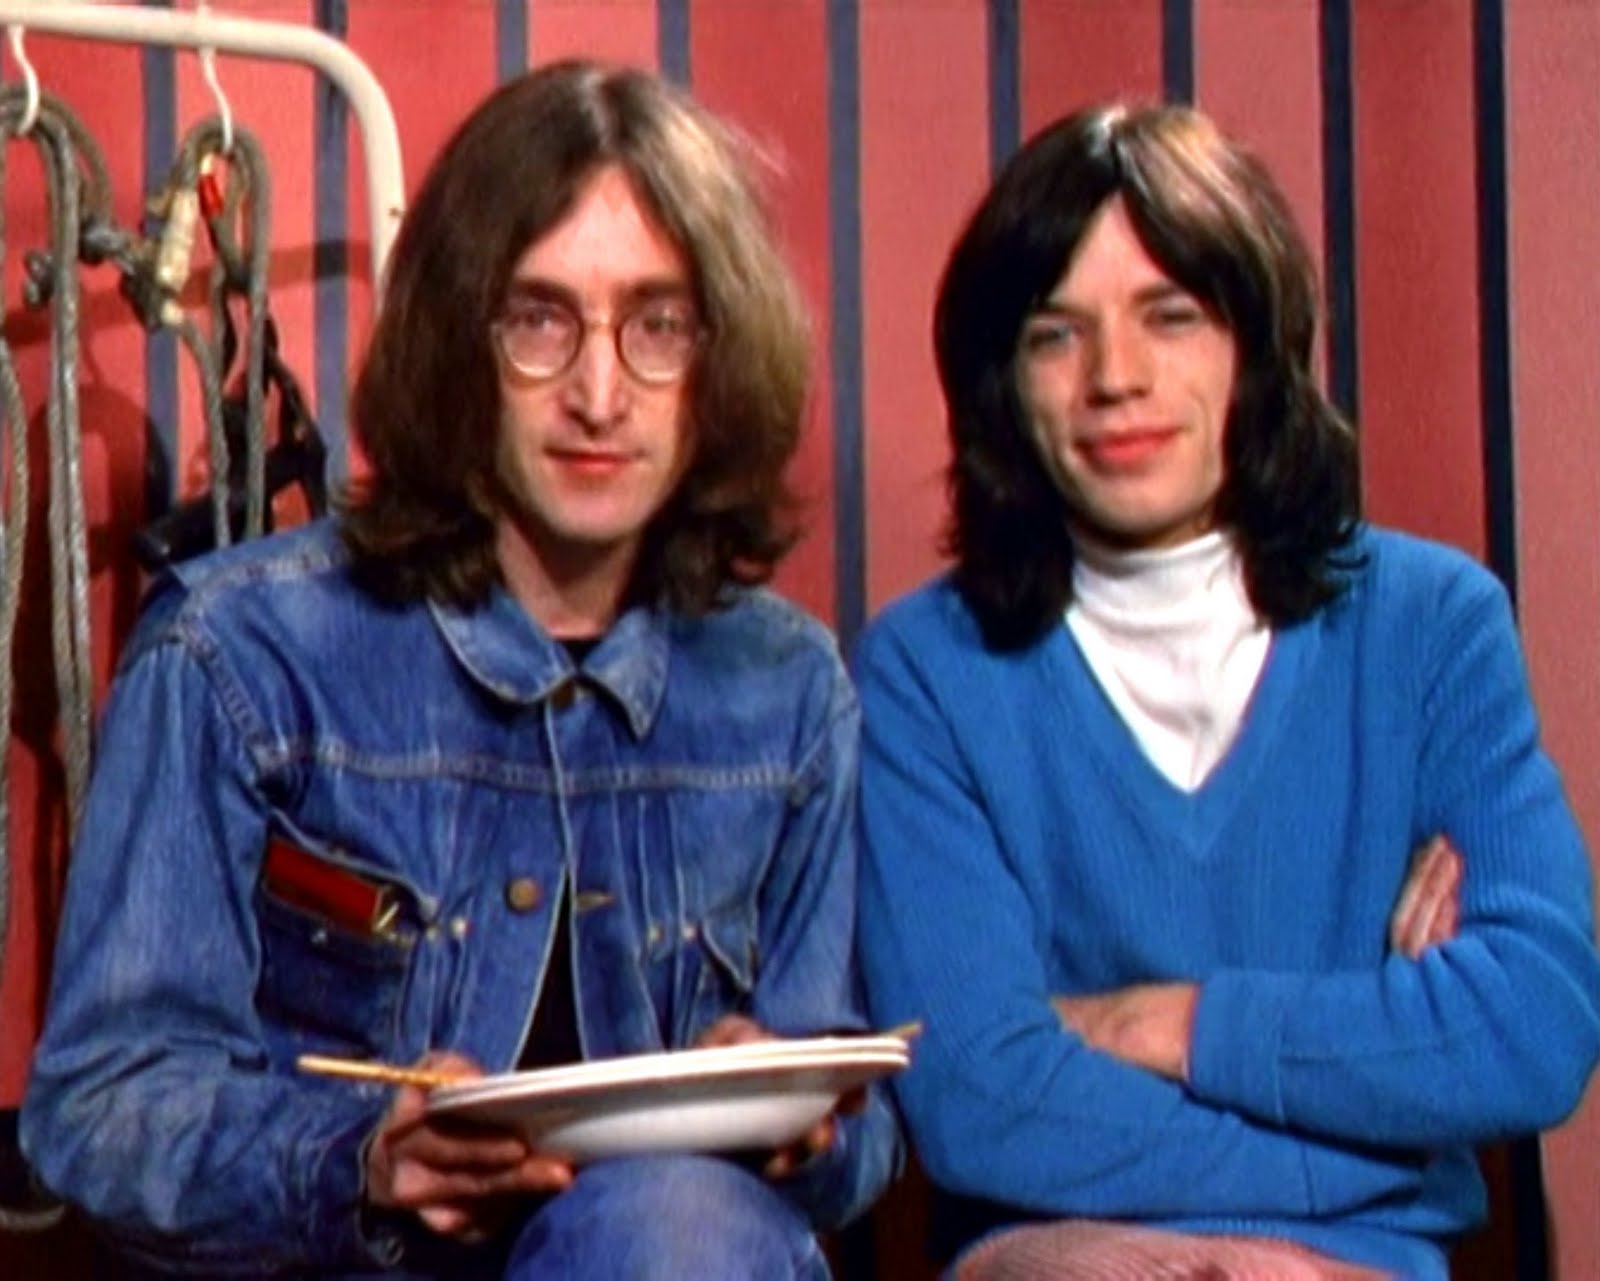 John-Lennon-and-Mick-Jagger-Rock-and-Rol